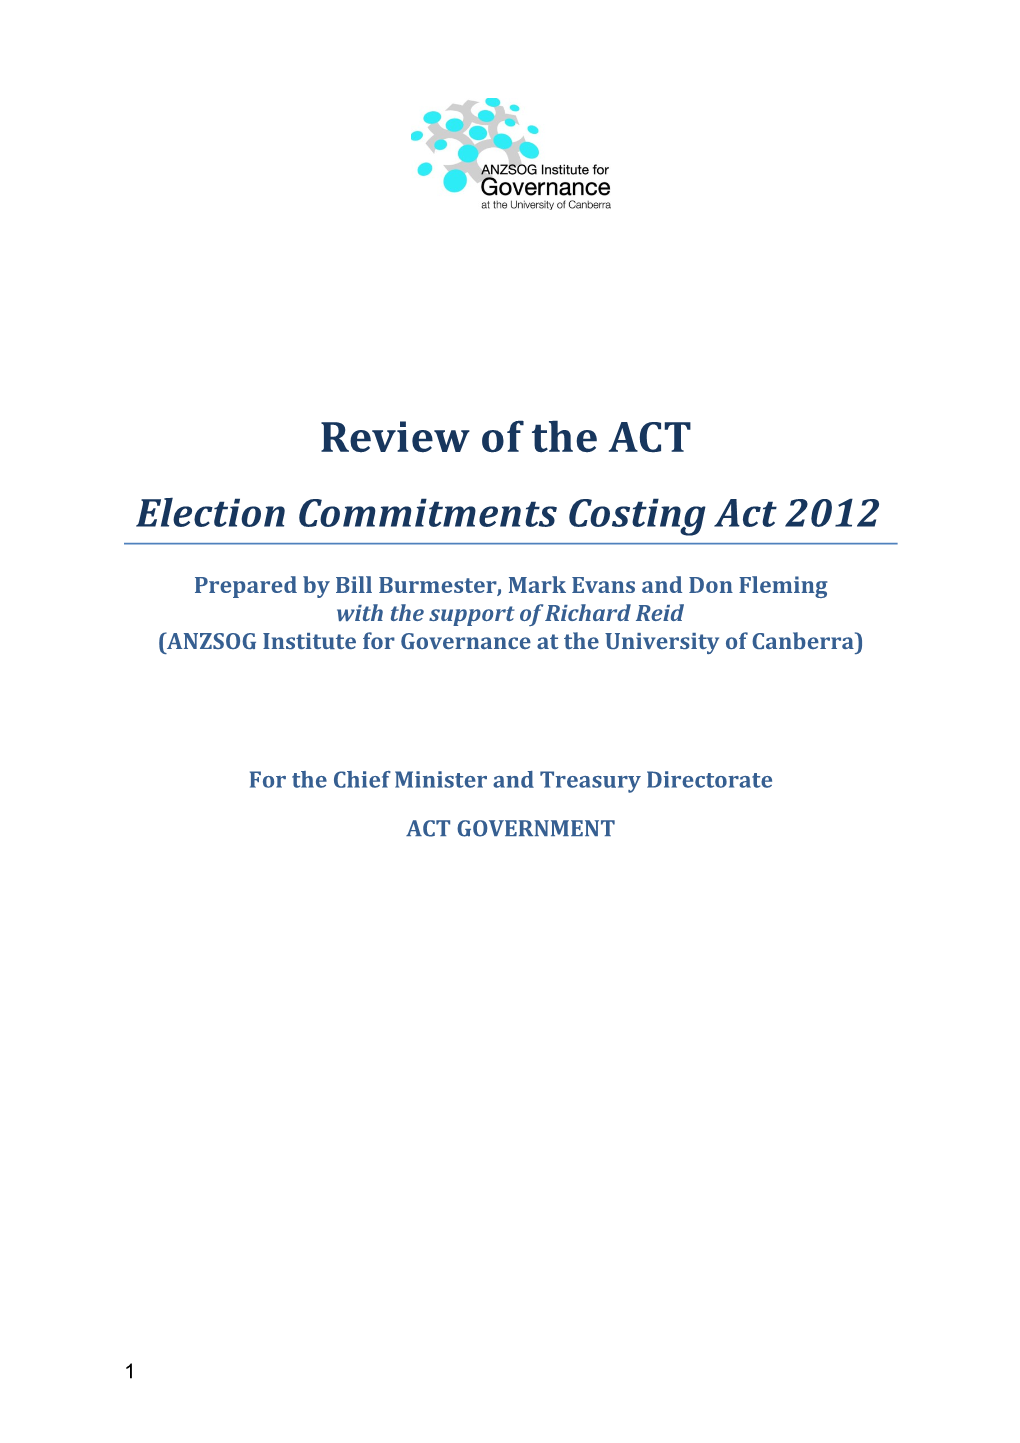 Review of the ACT Election Commitments Costing Act 2012